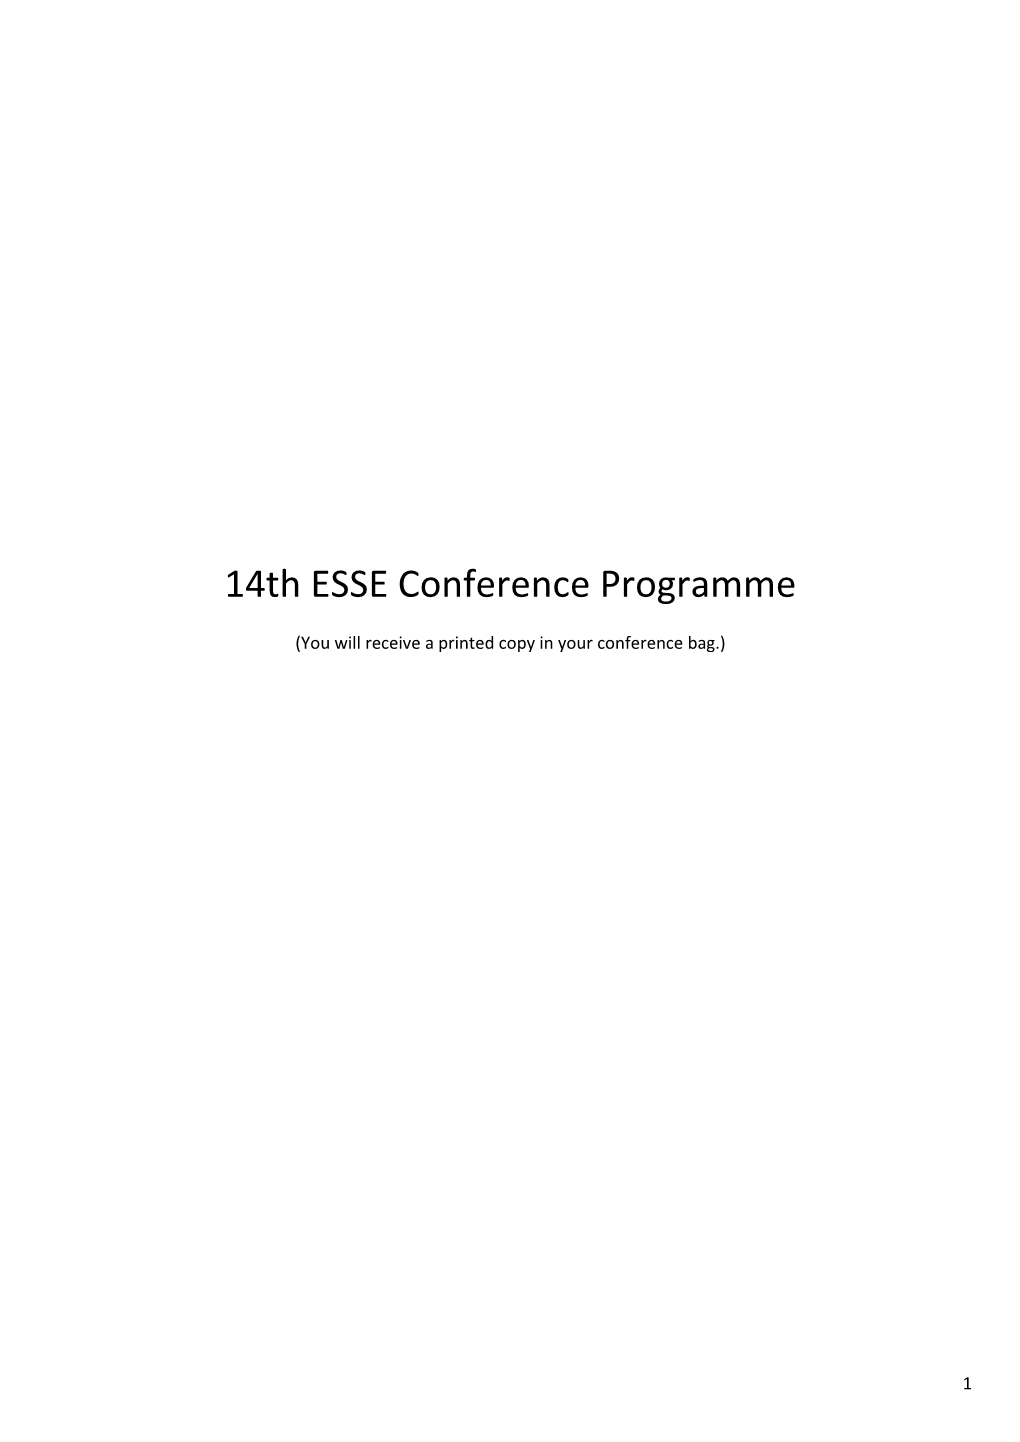 14Th ESSE Conference Programme